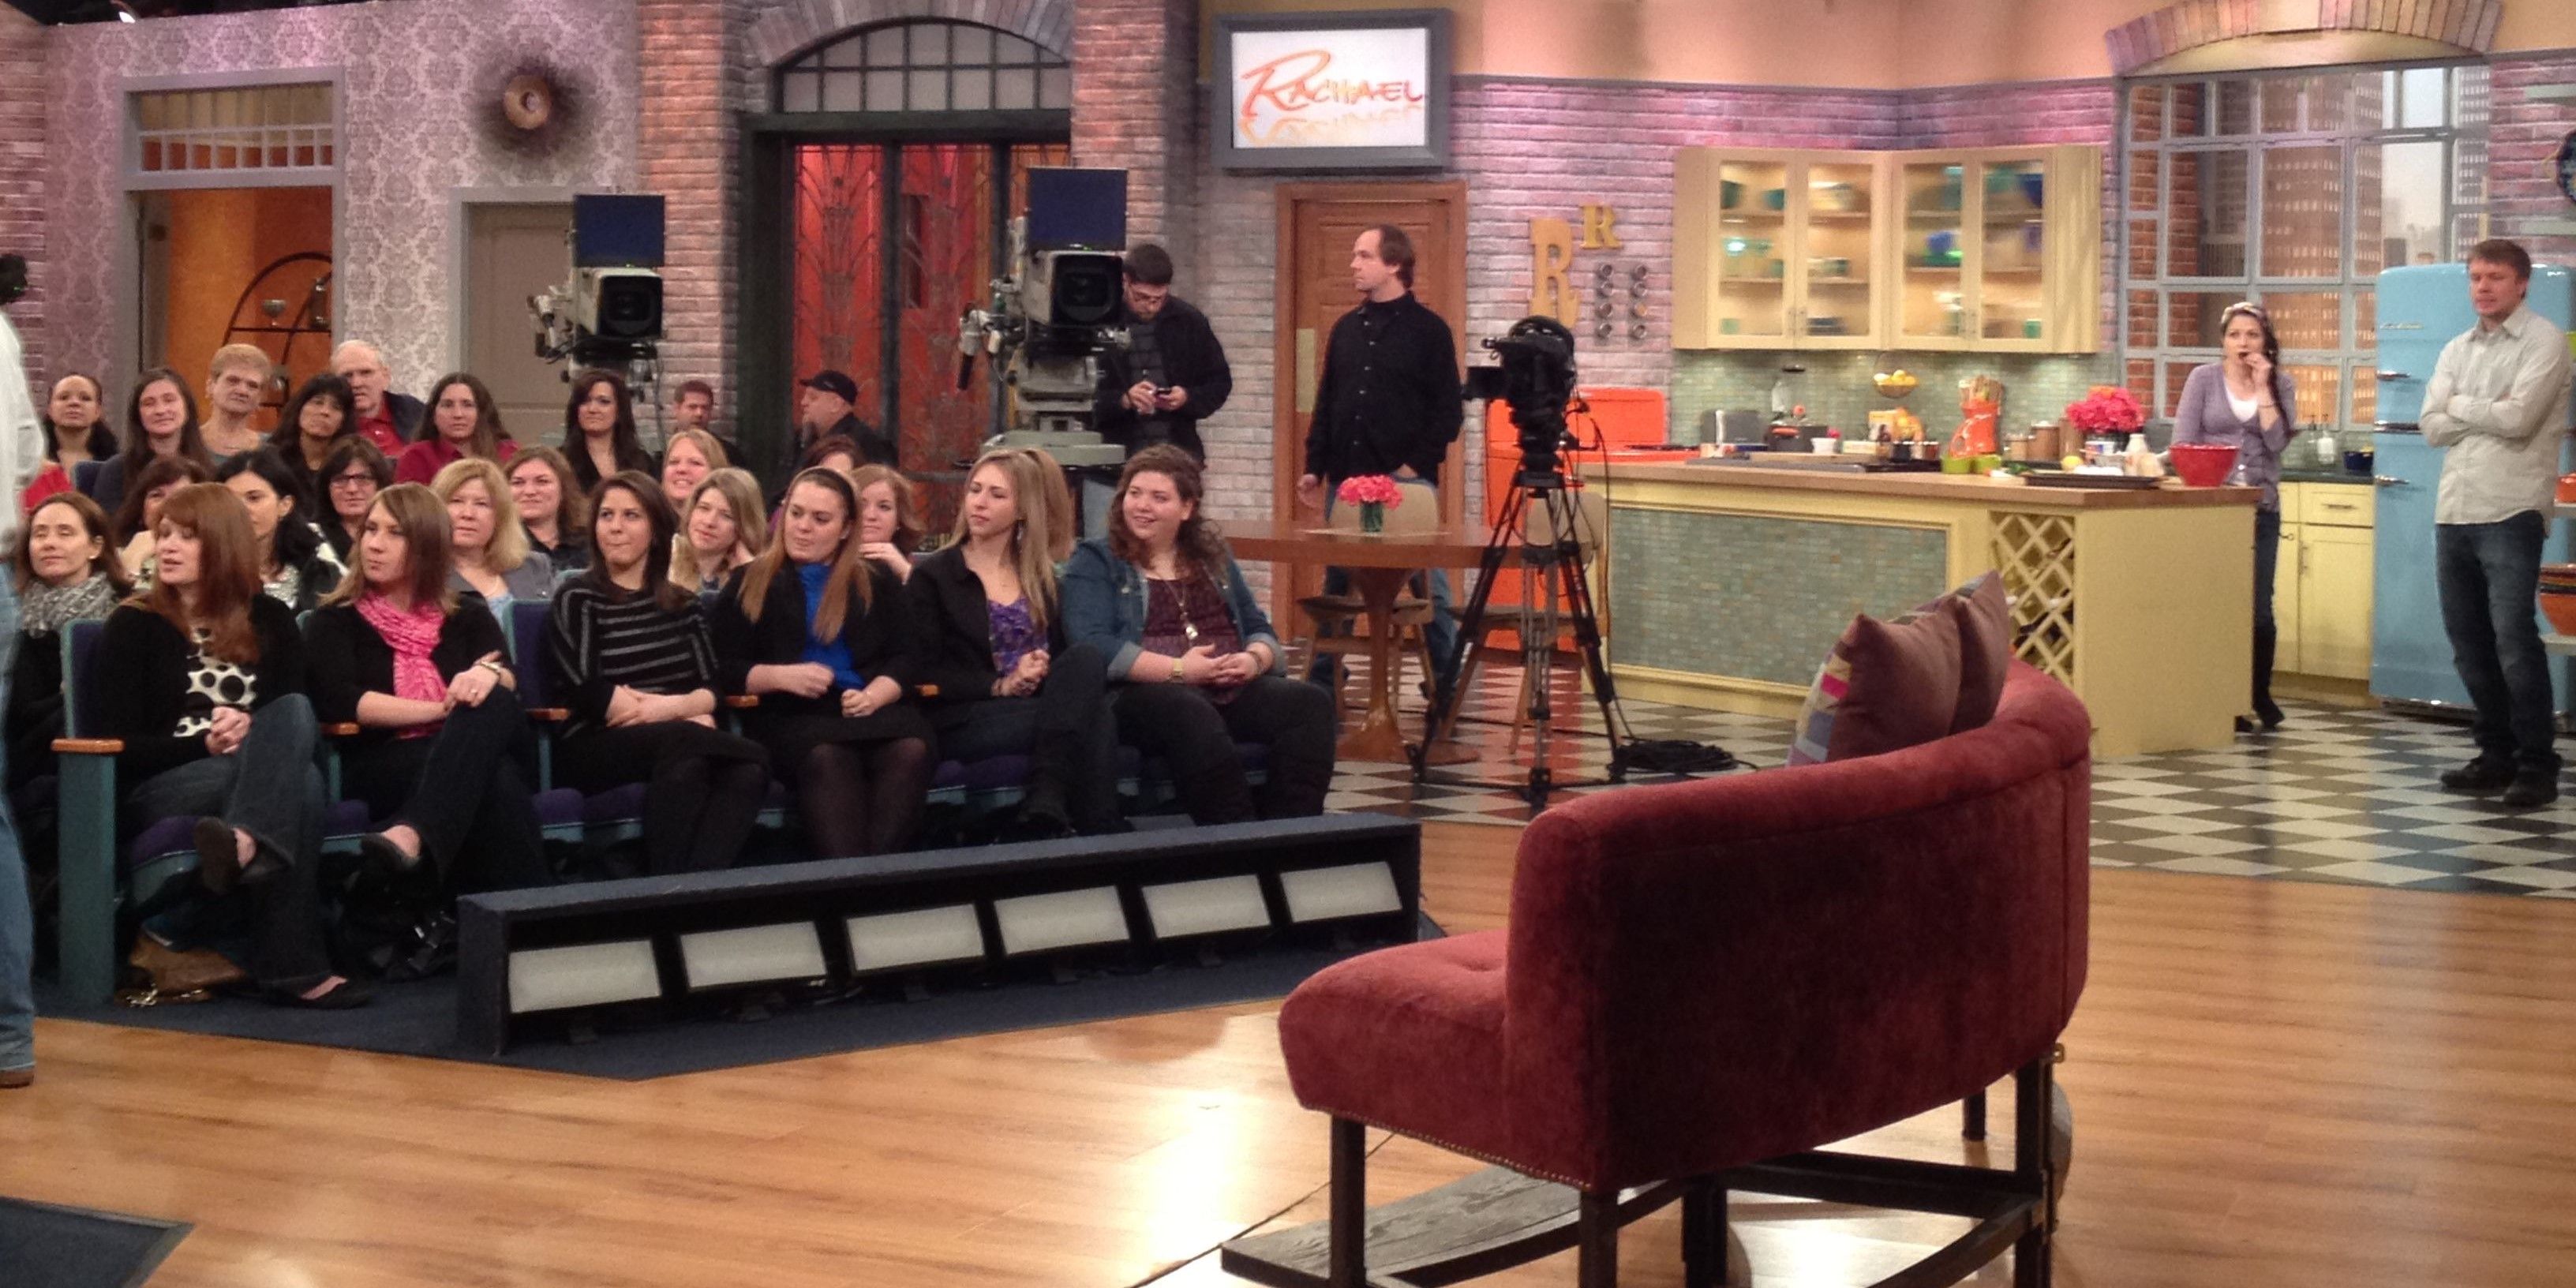 10 BehindTheScenes Secrets From The Rachael Ray Show